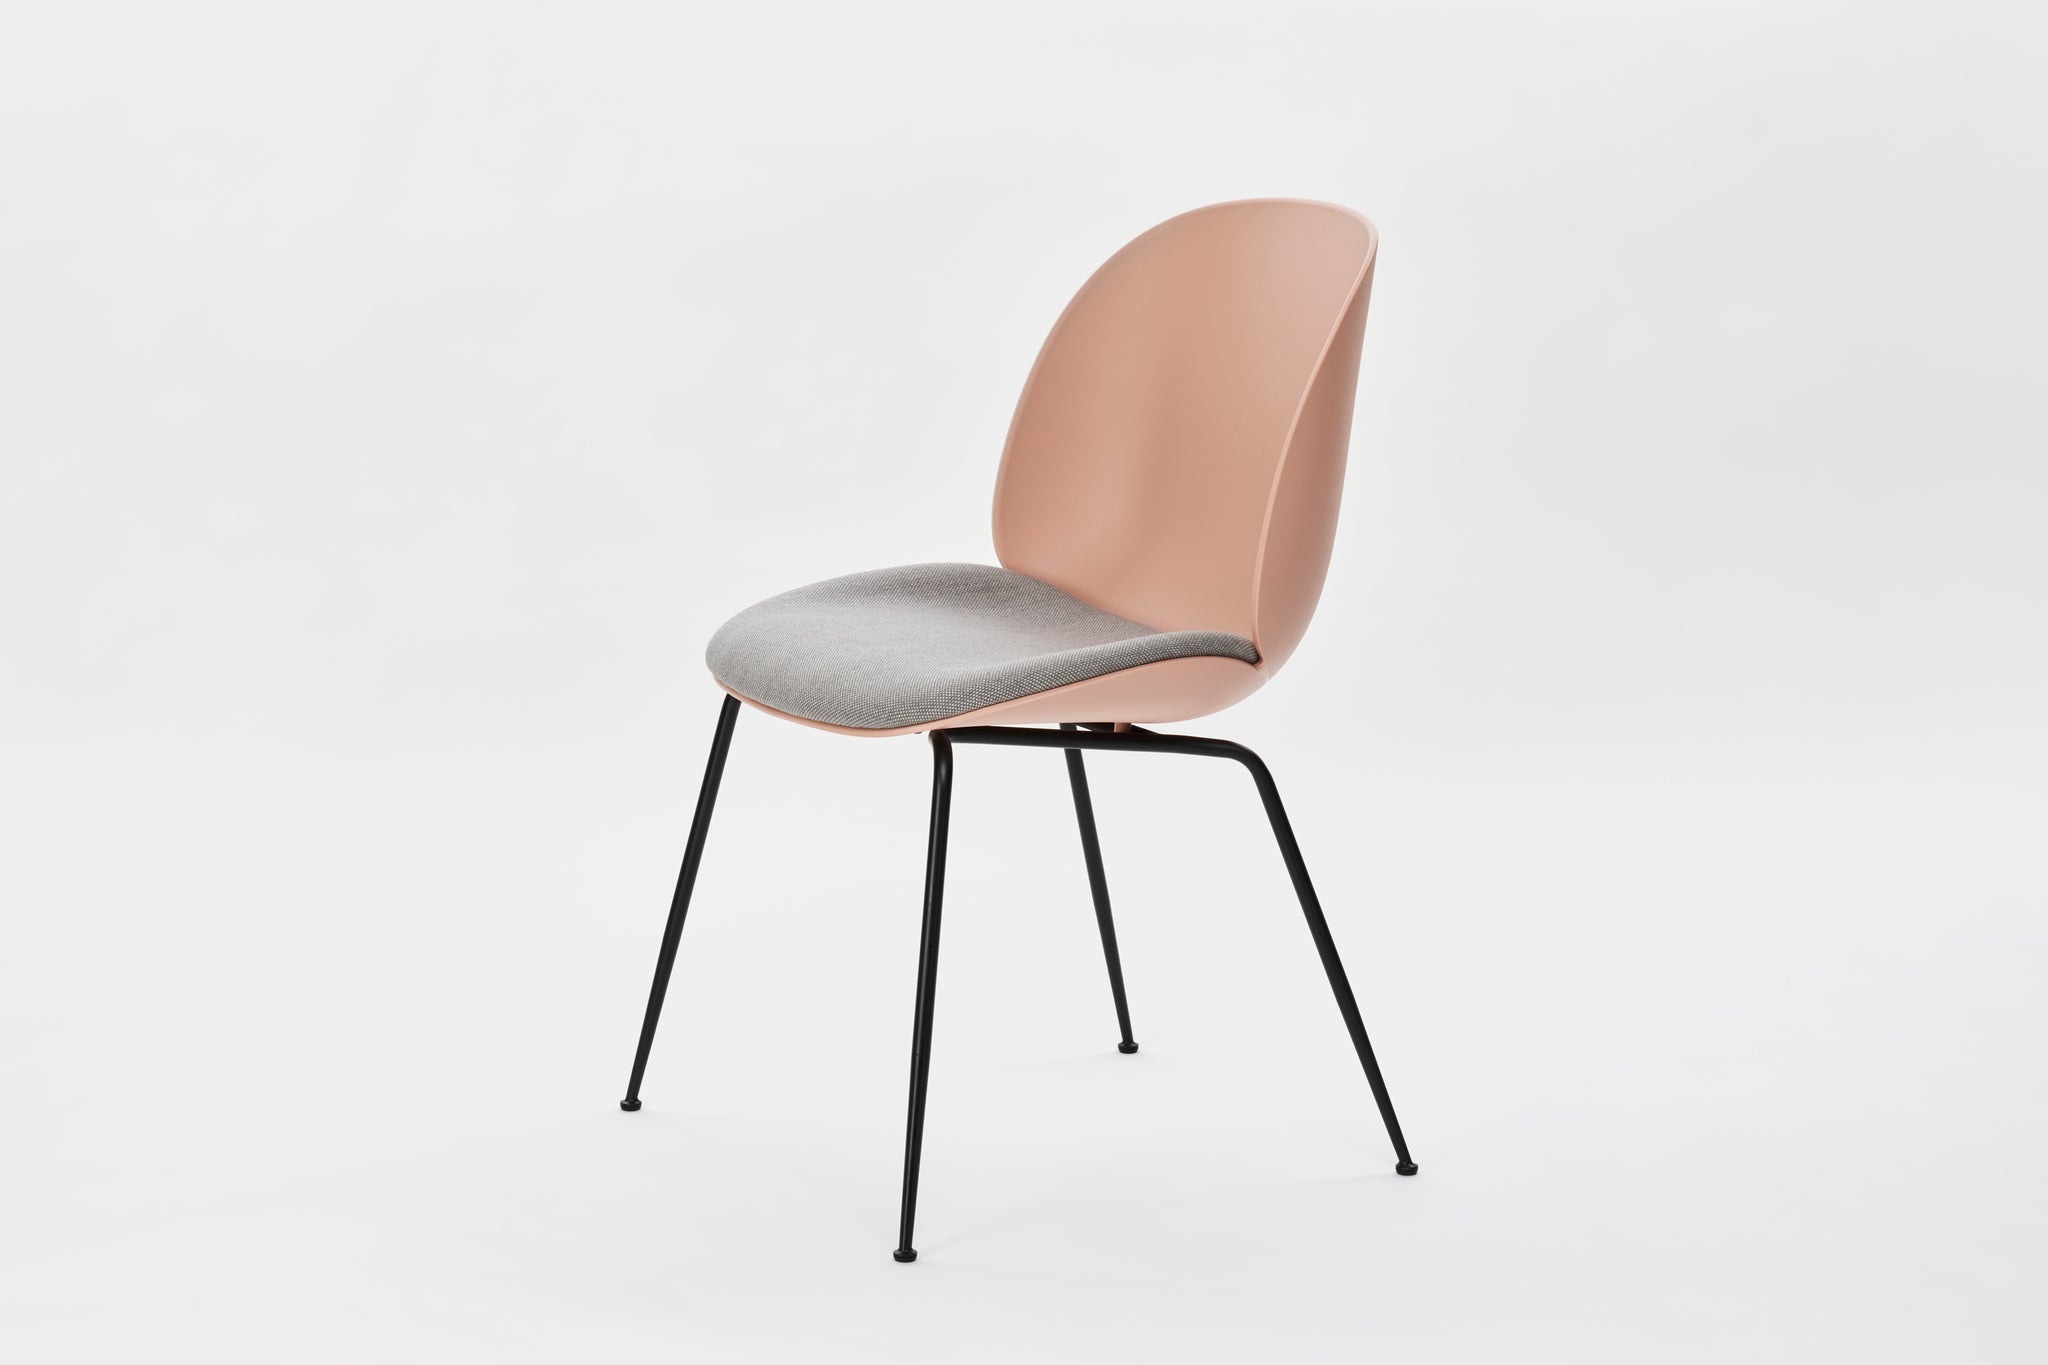 Beetle Chair - seat upholstered, conic base (short leg)